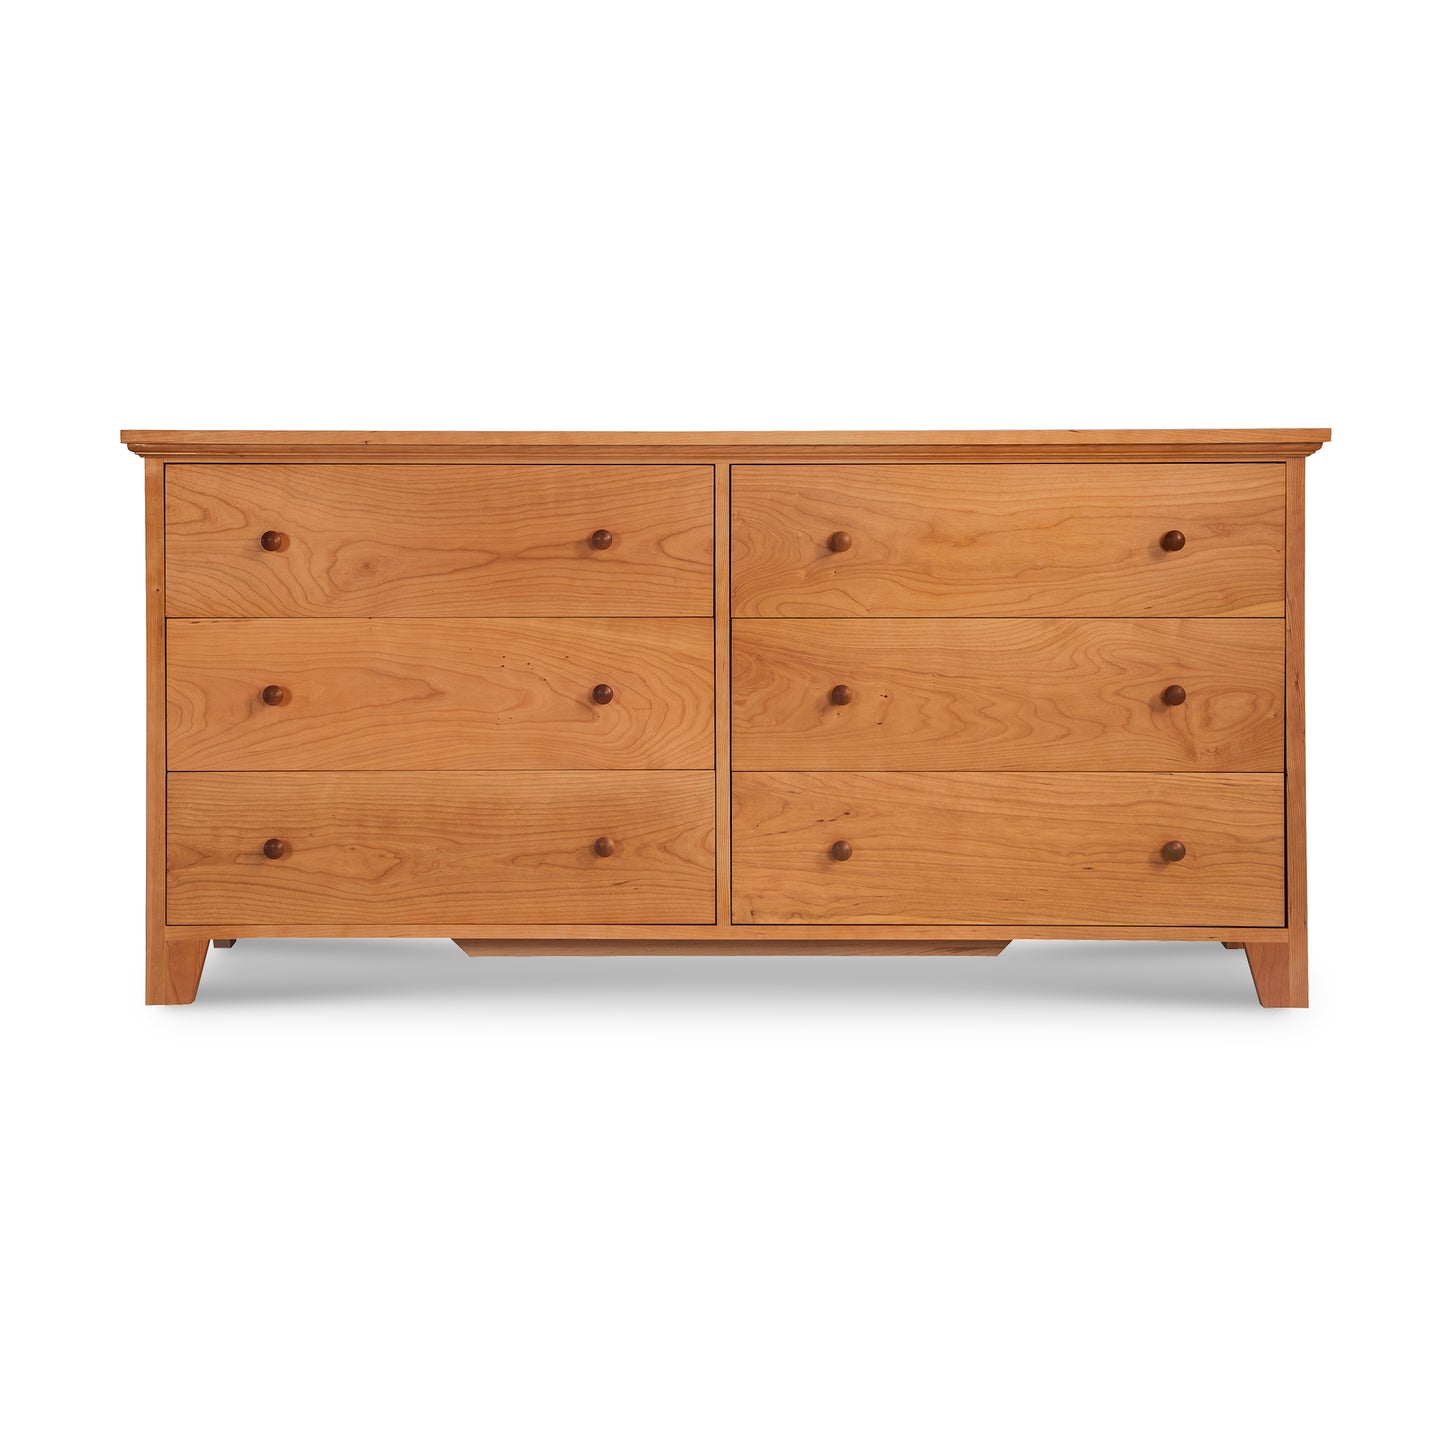 A Lyndon Furniture American Country 6-Drawer Dresser with drawers on a white background.